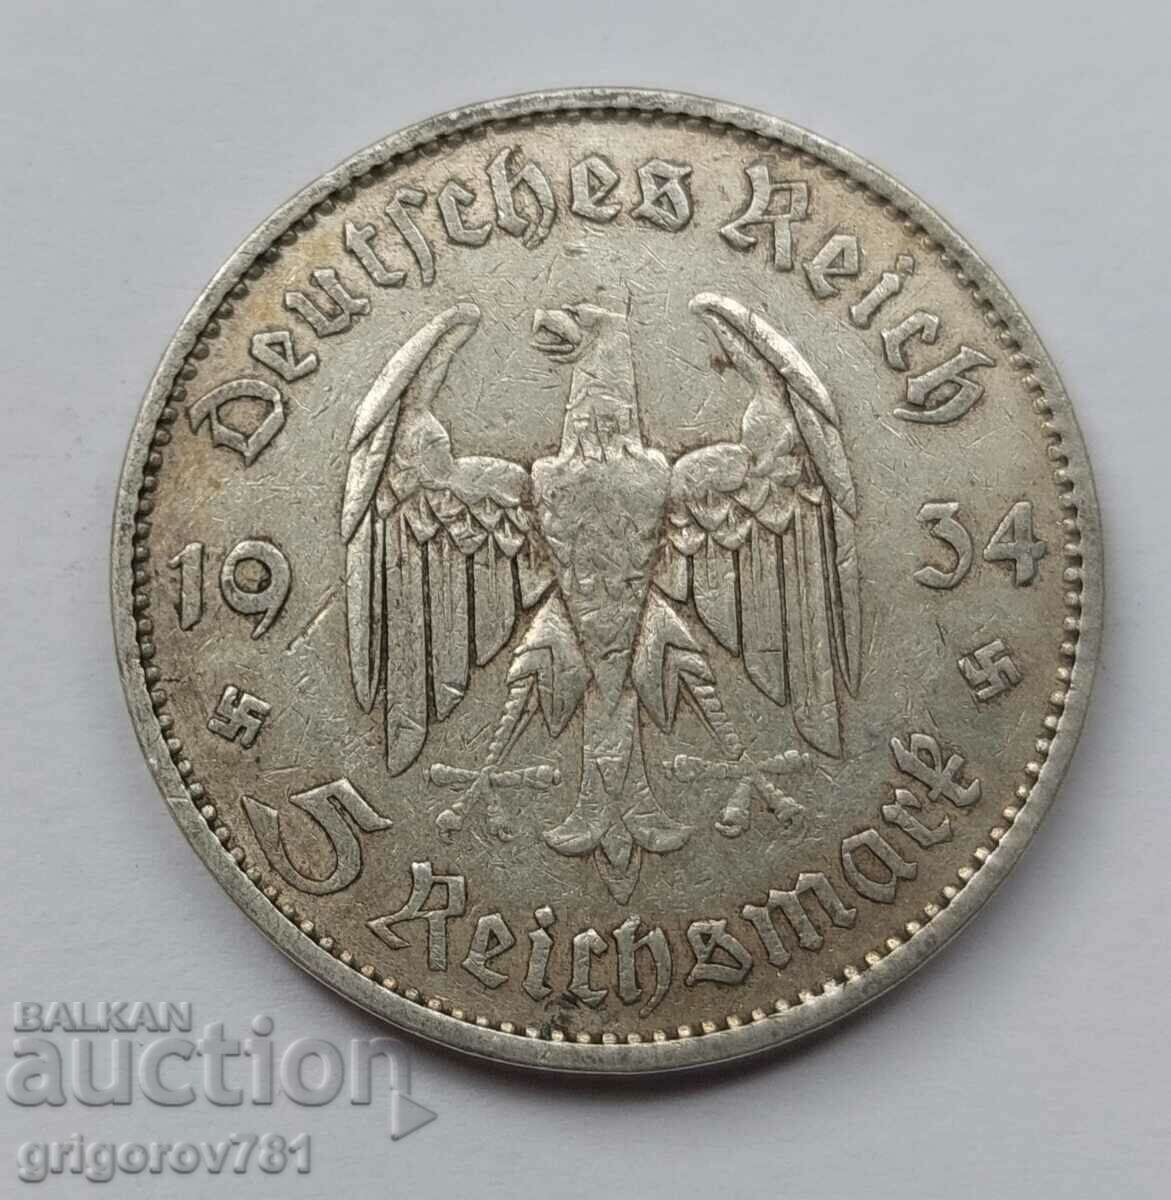 5 Mark Silver Germany 1934 A III Reich Silver Coin #6